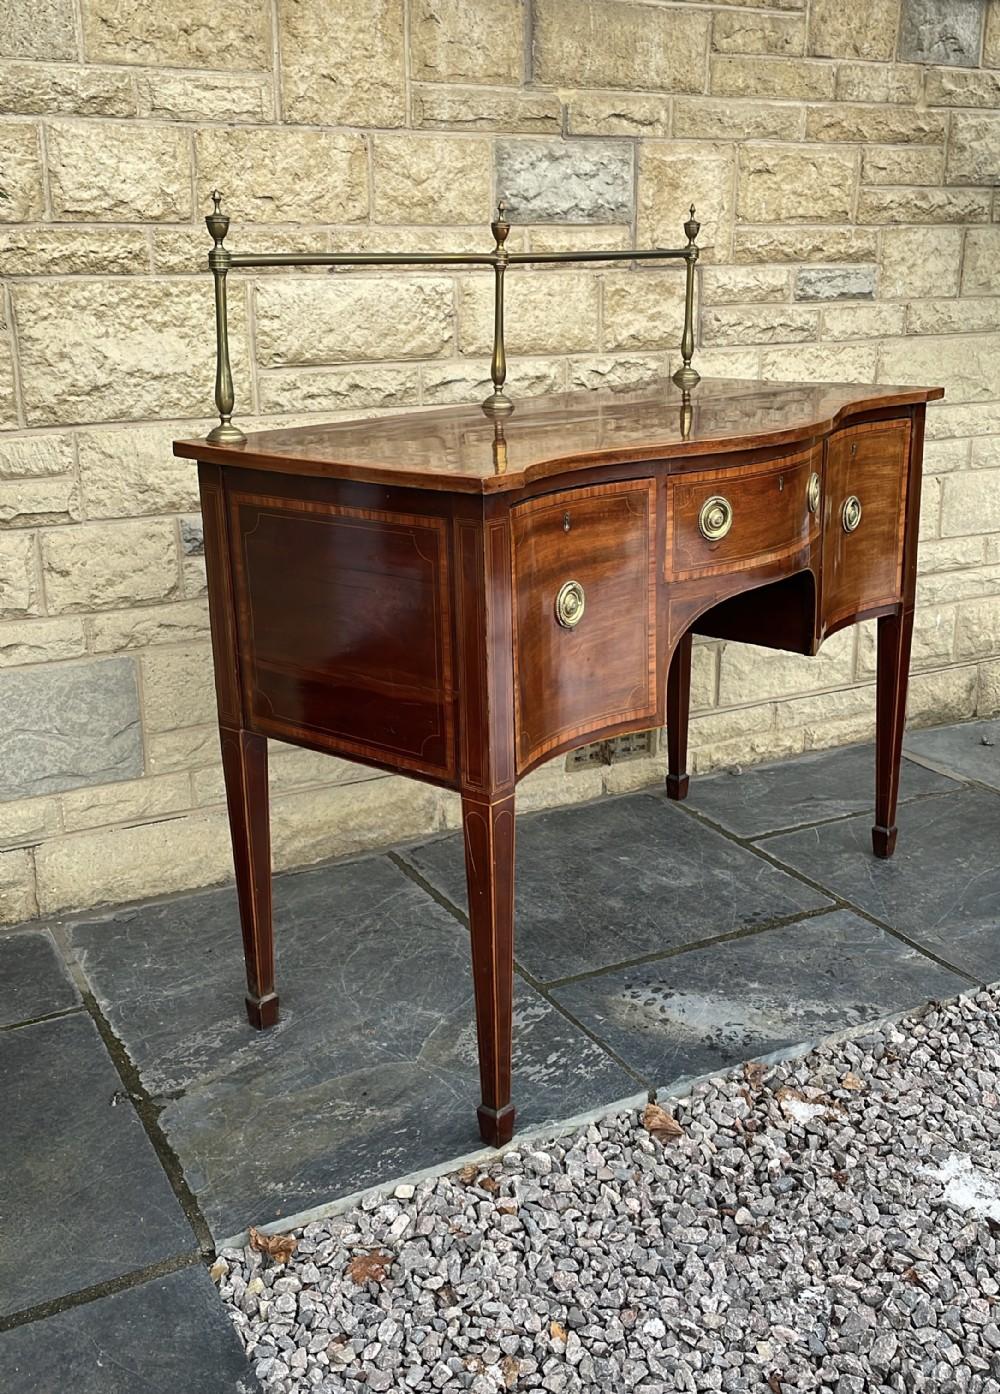  Early 19th C. English Inlaid Figured Mahogany Hepp. Style Serpentine Sideboard For Sale 12